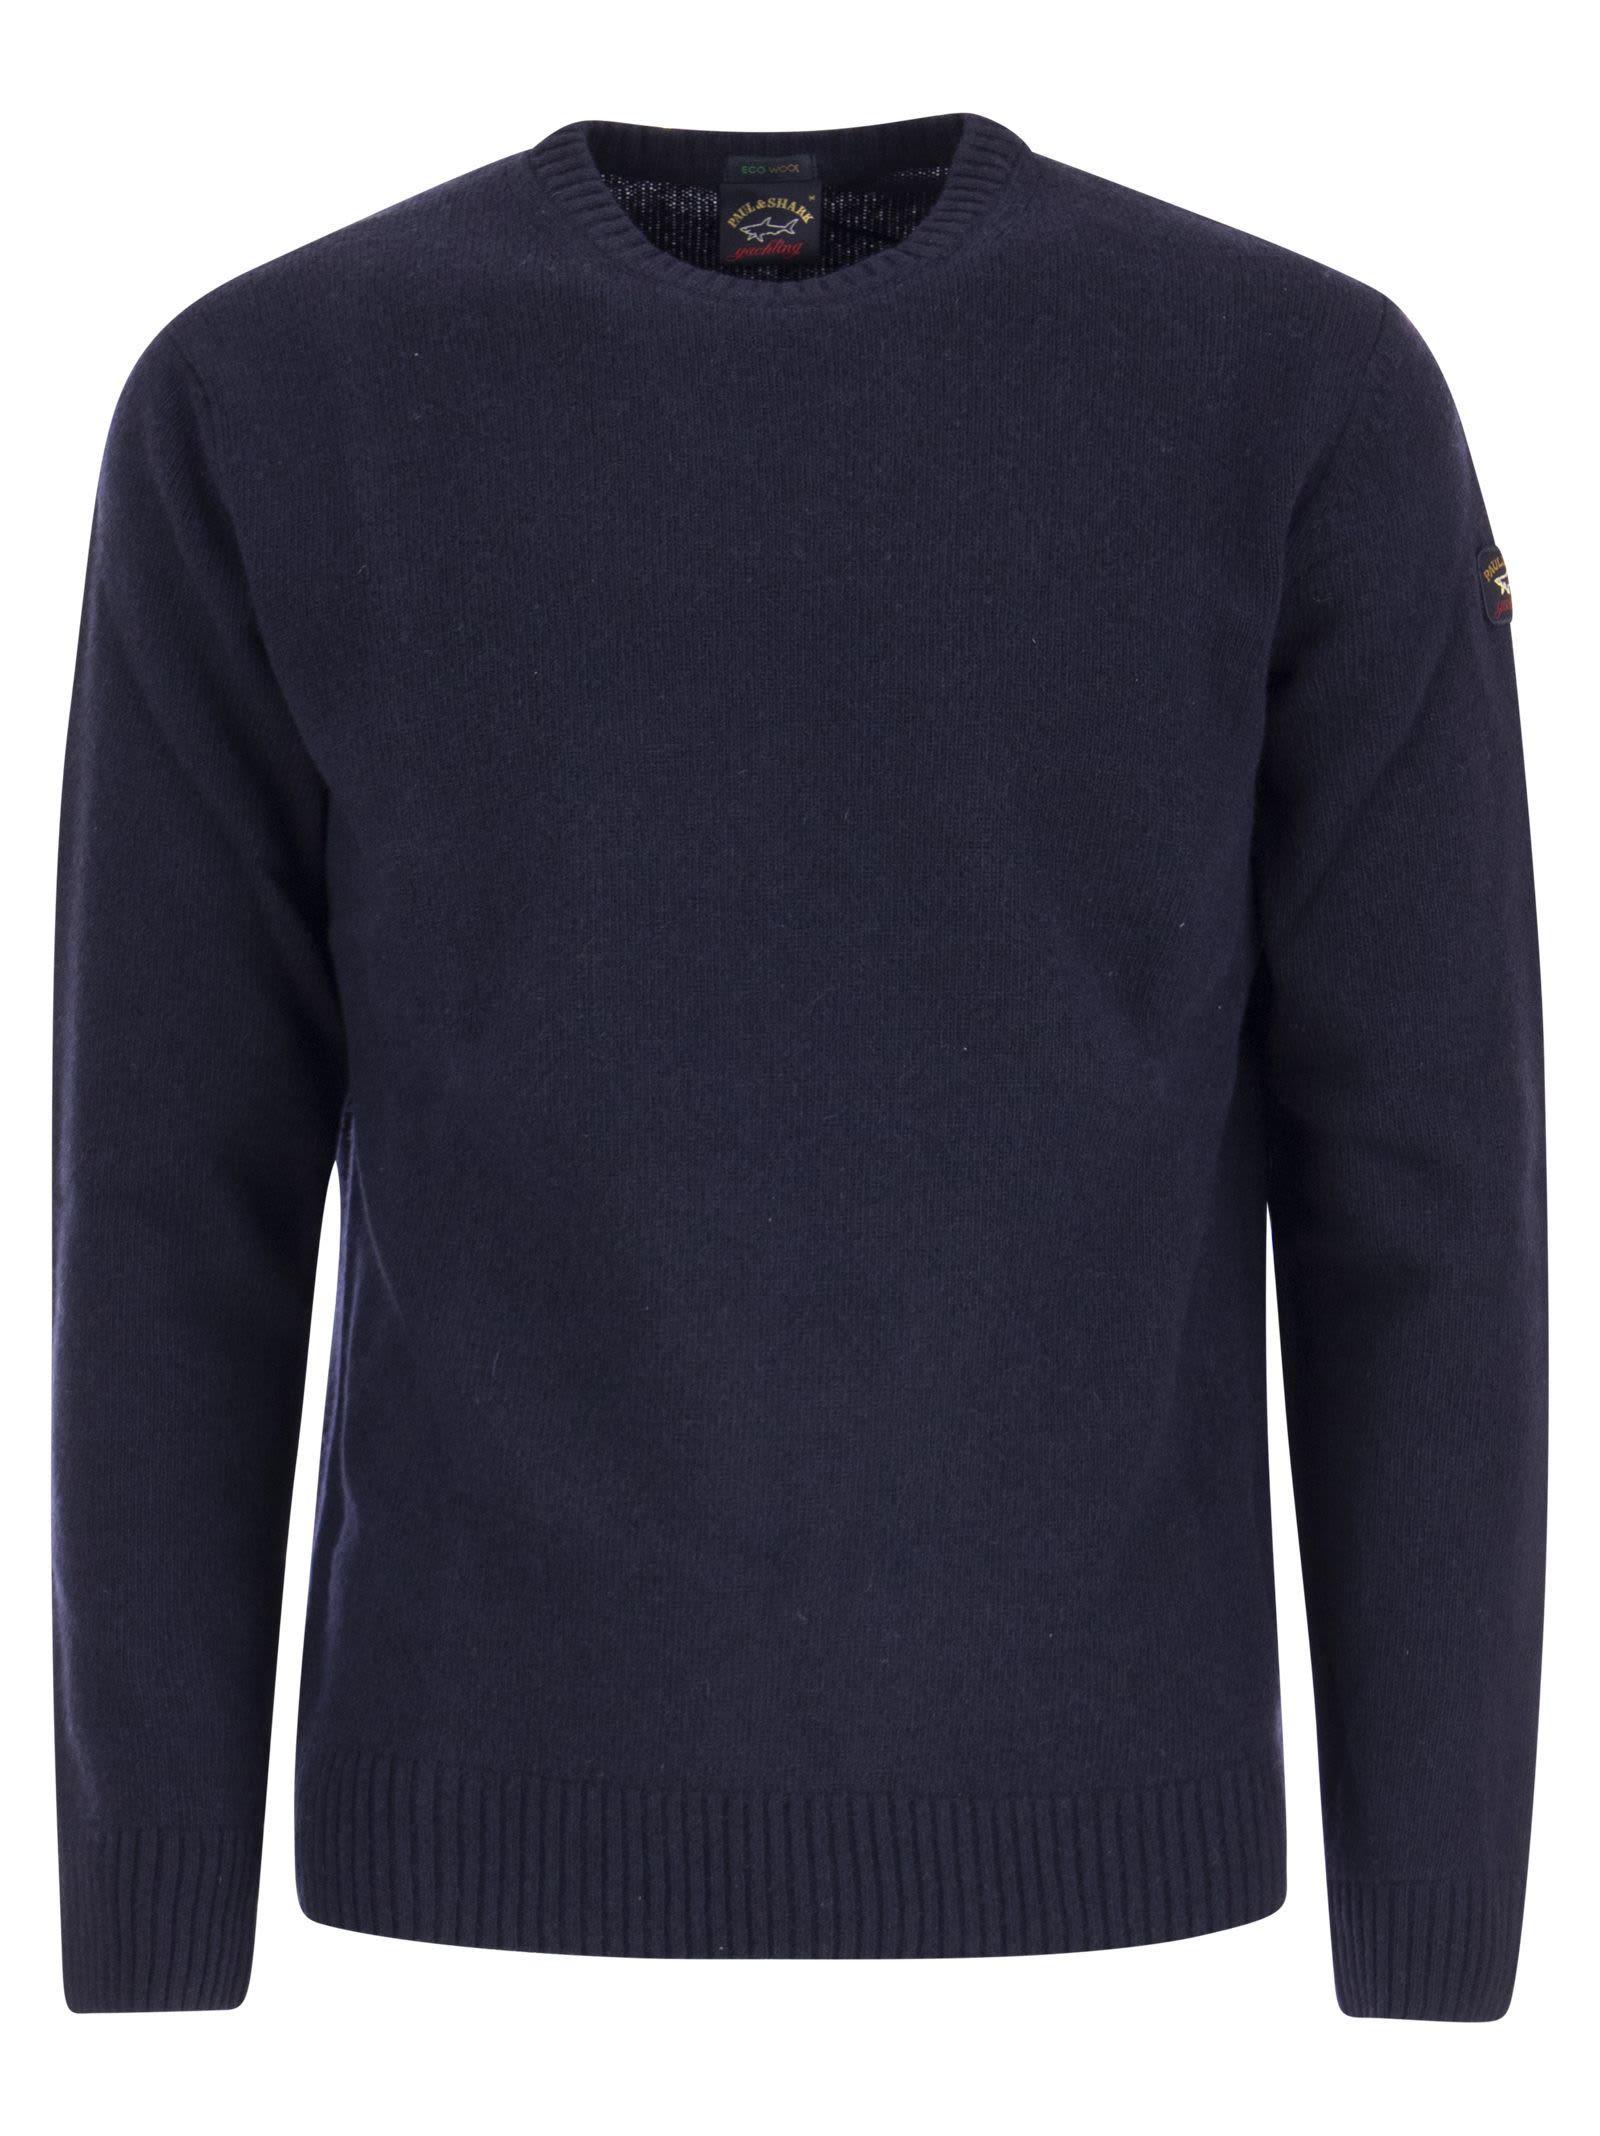 Wool Crew Neck With Arm Patch